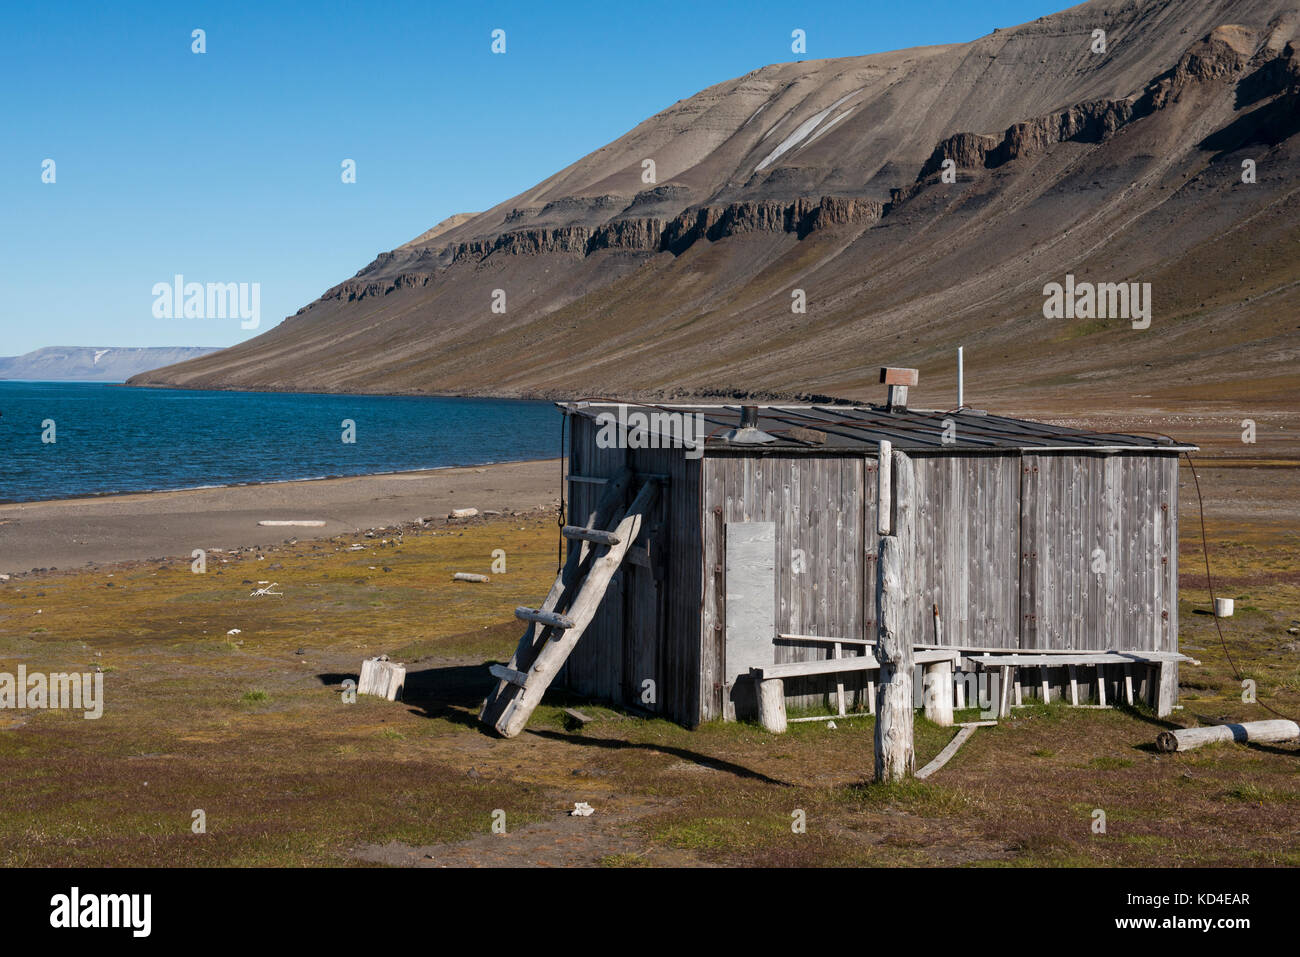 Norway, Svalbard, South Svalbard Nature Reserve, Edgeoya, Kapp Lee. Old trappers cabin on remote beach. Stock Photo